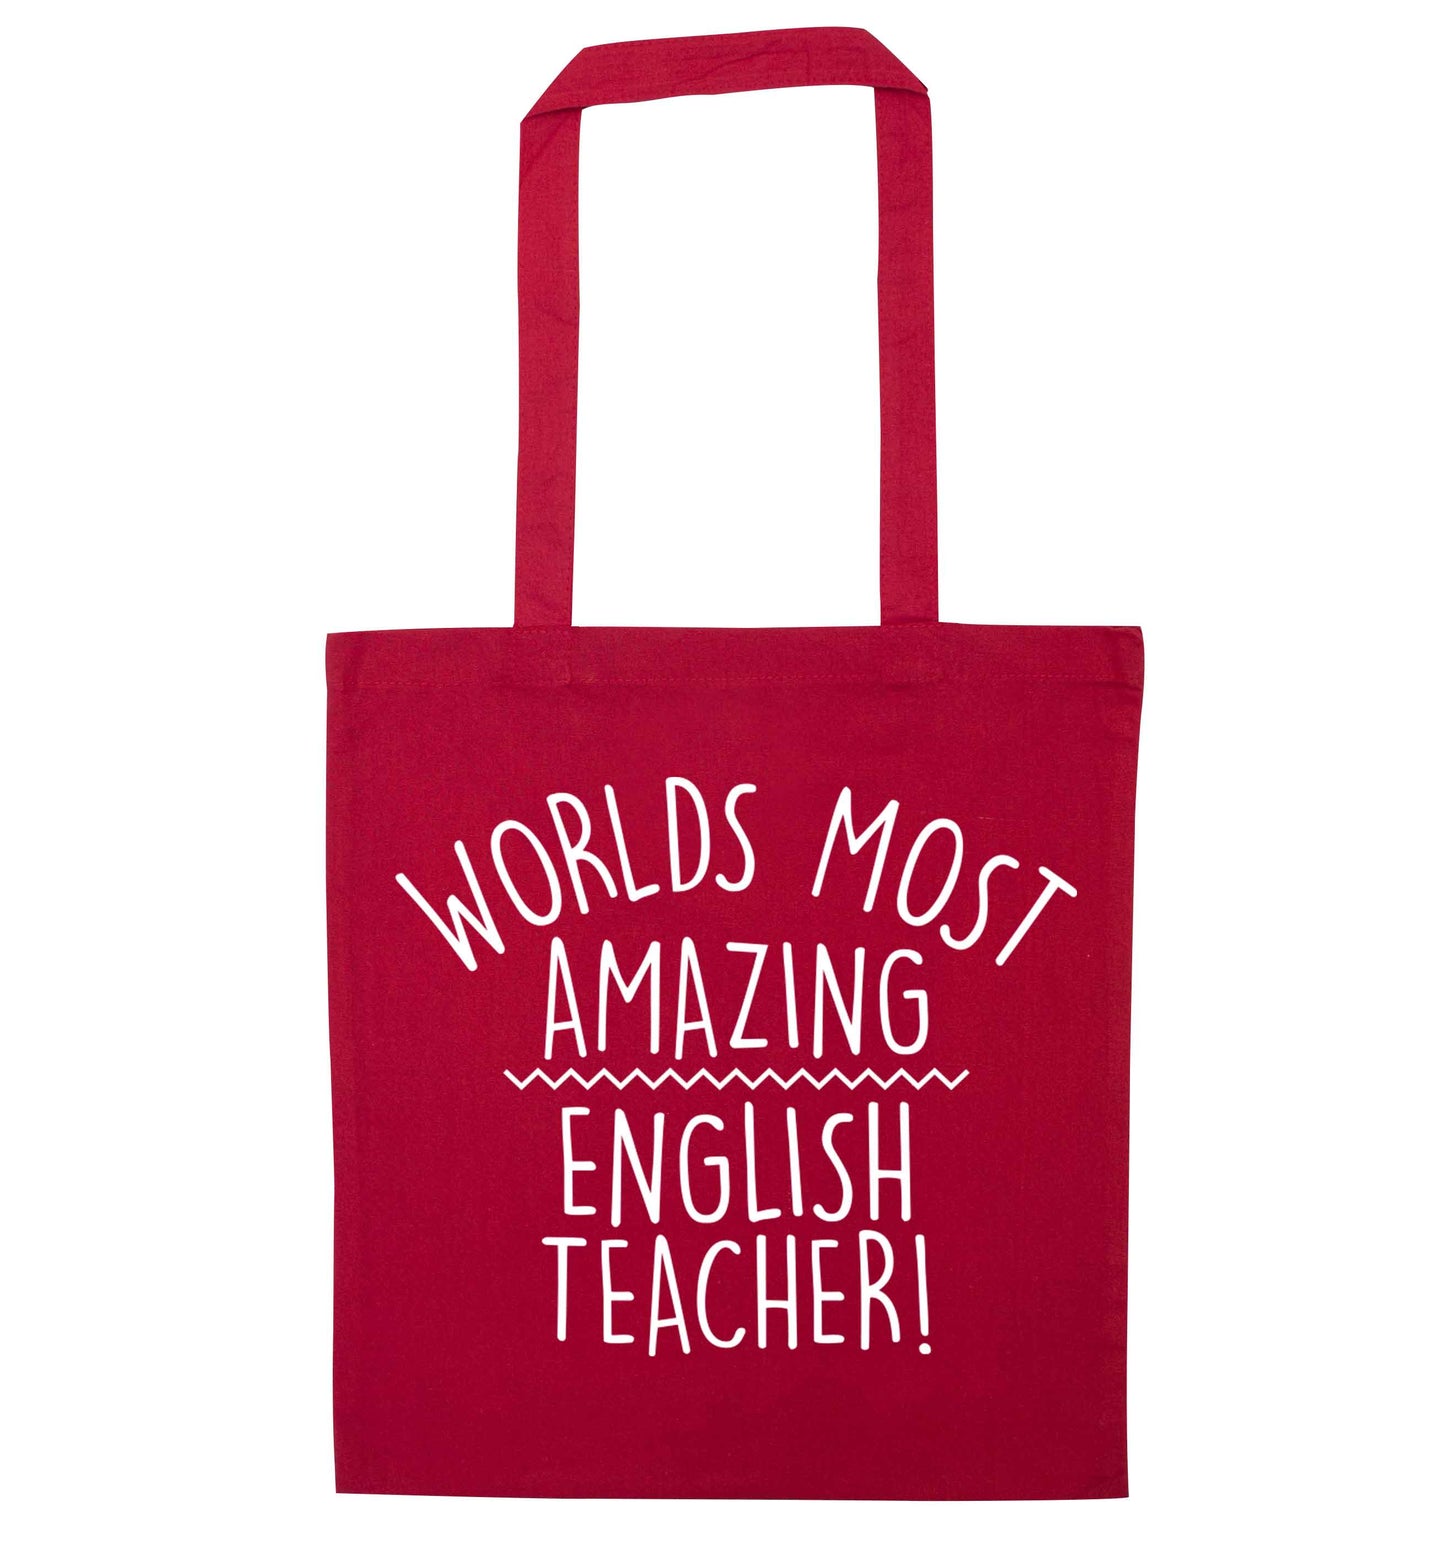 Worlds most amazing English teacher red tote bag